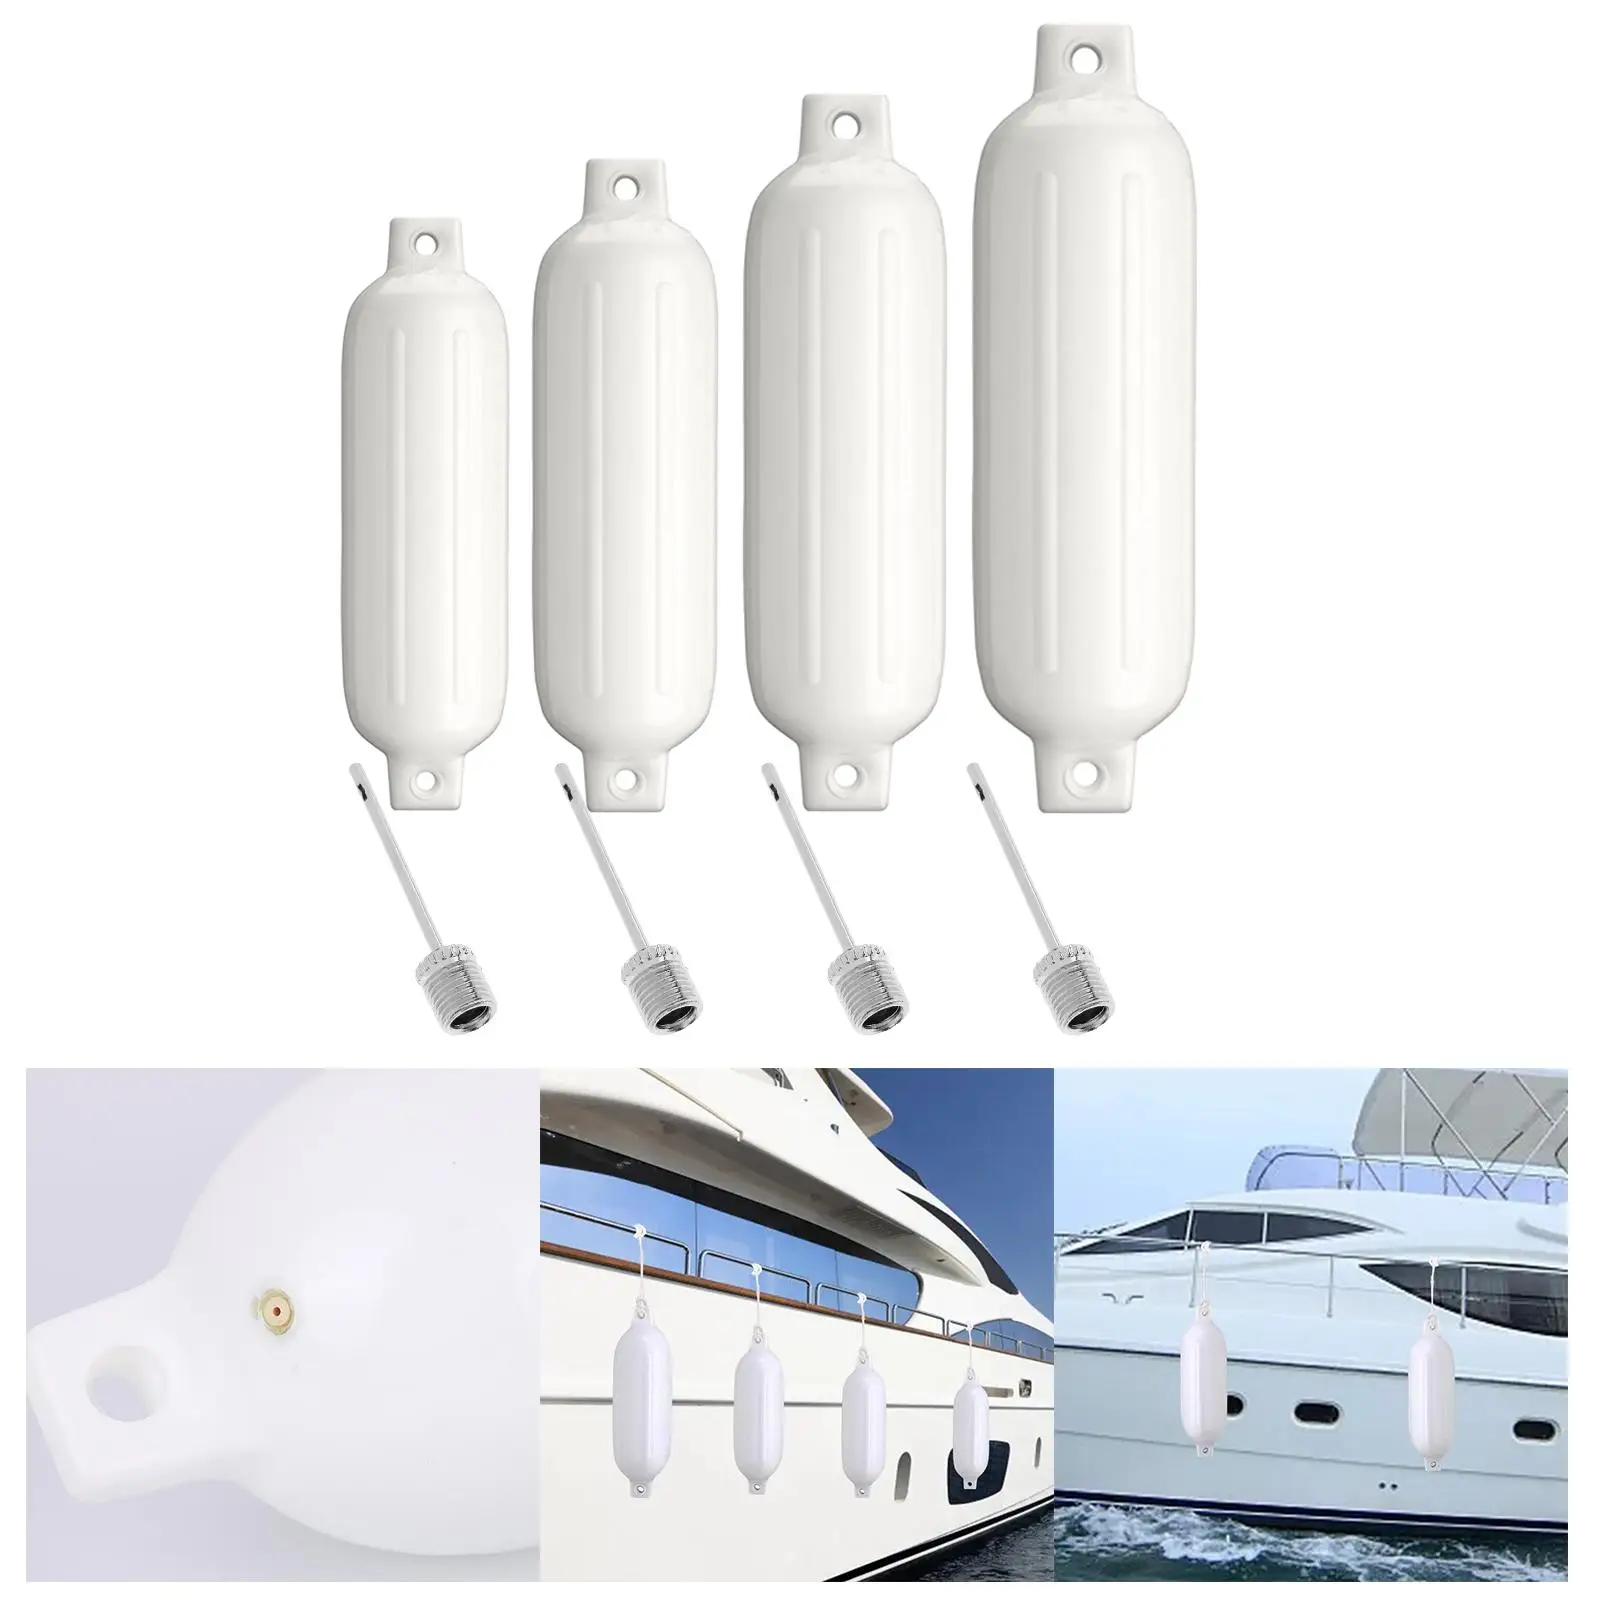 Boat Fender Floating Platform Boat Accessories Marine Boat Bumpers Fenders for Sport Boats Boat Pontoon Fishing Boats Yacht